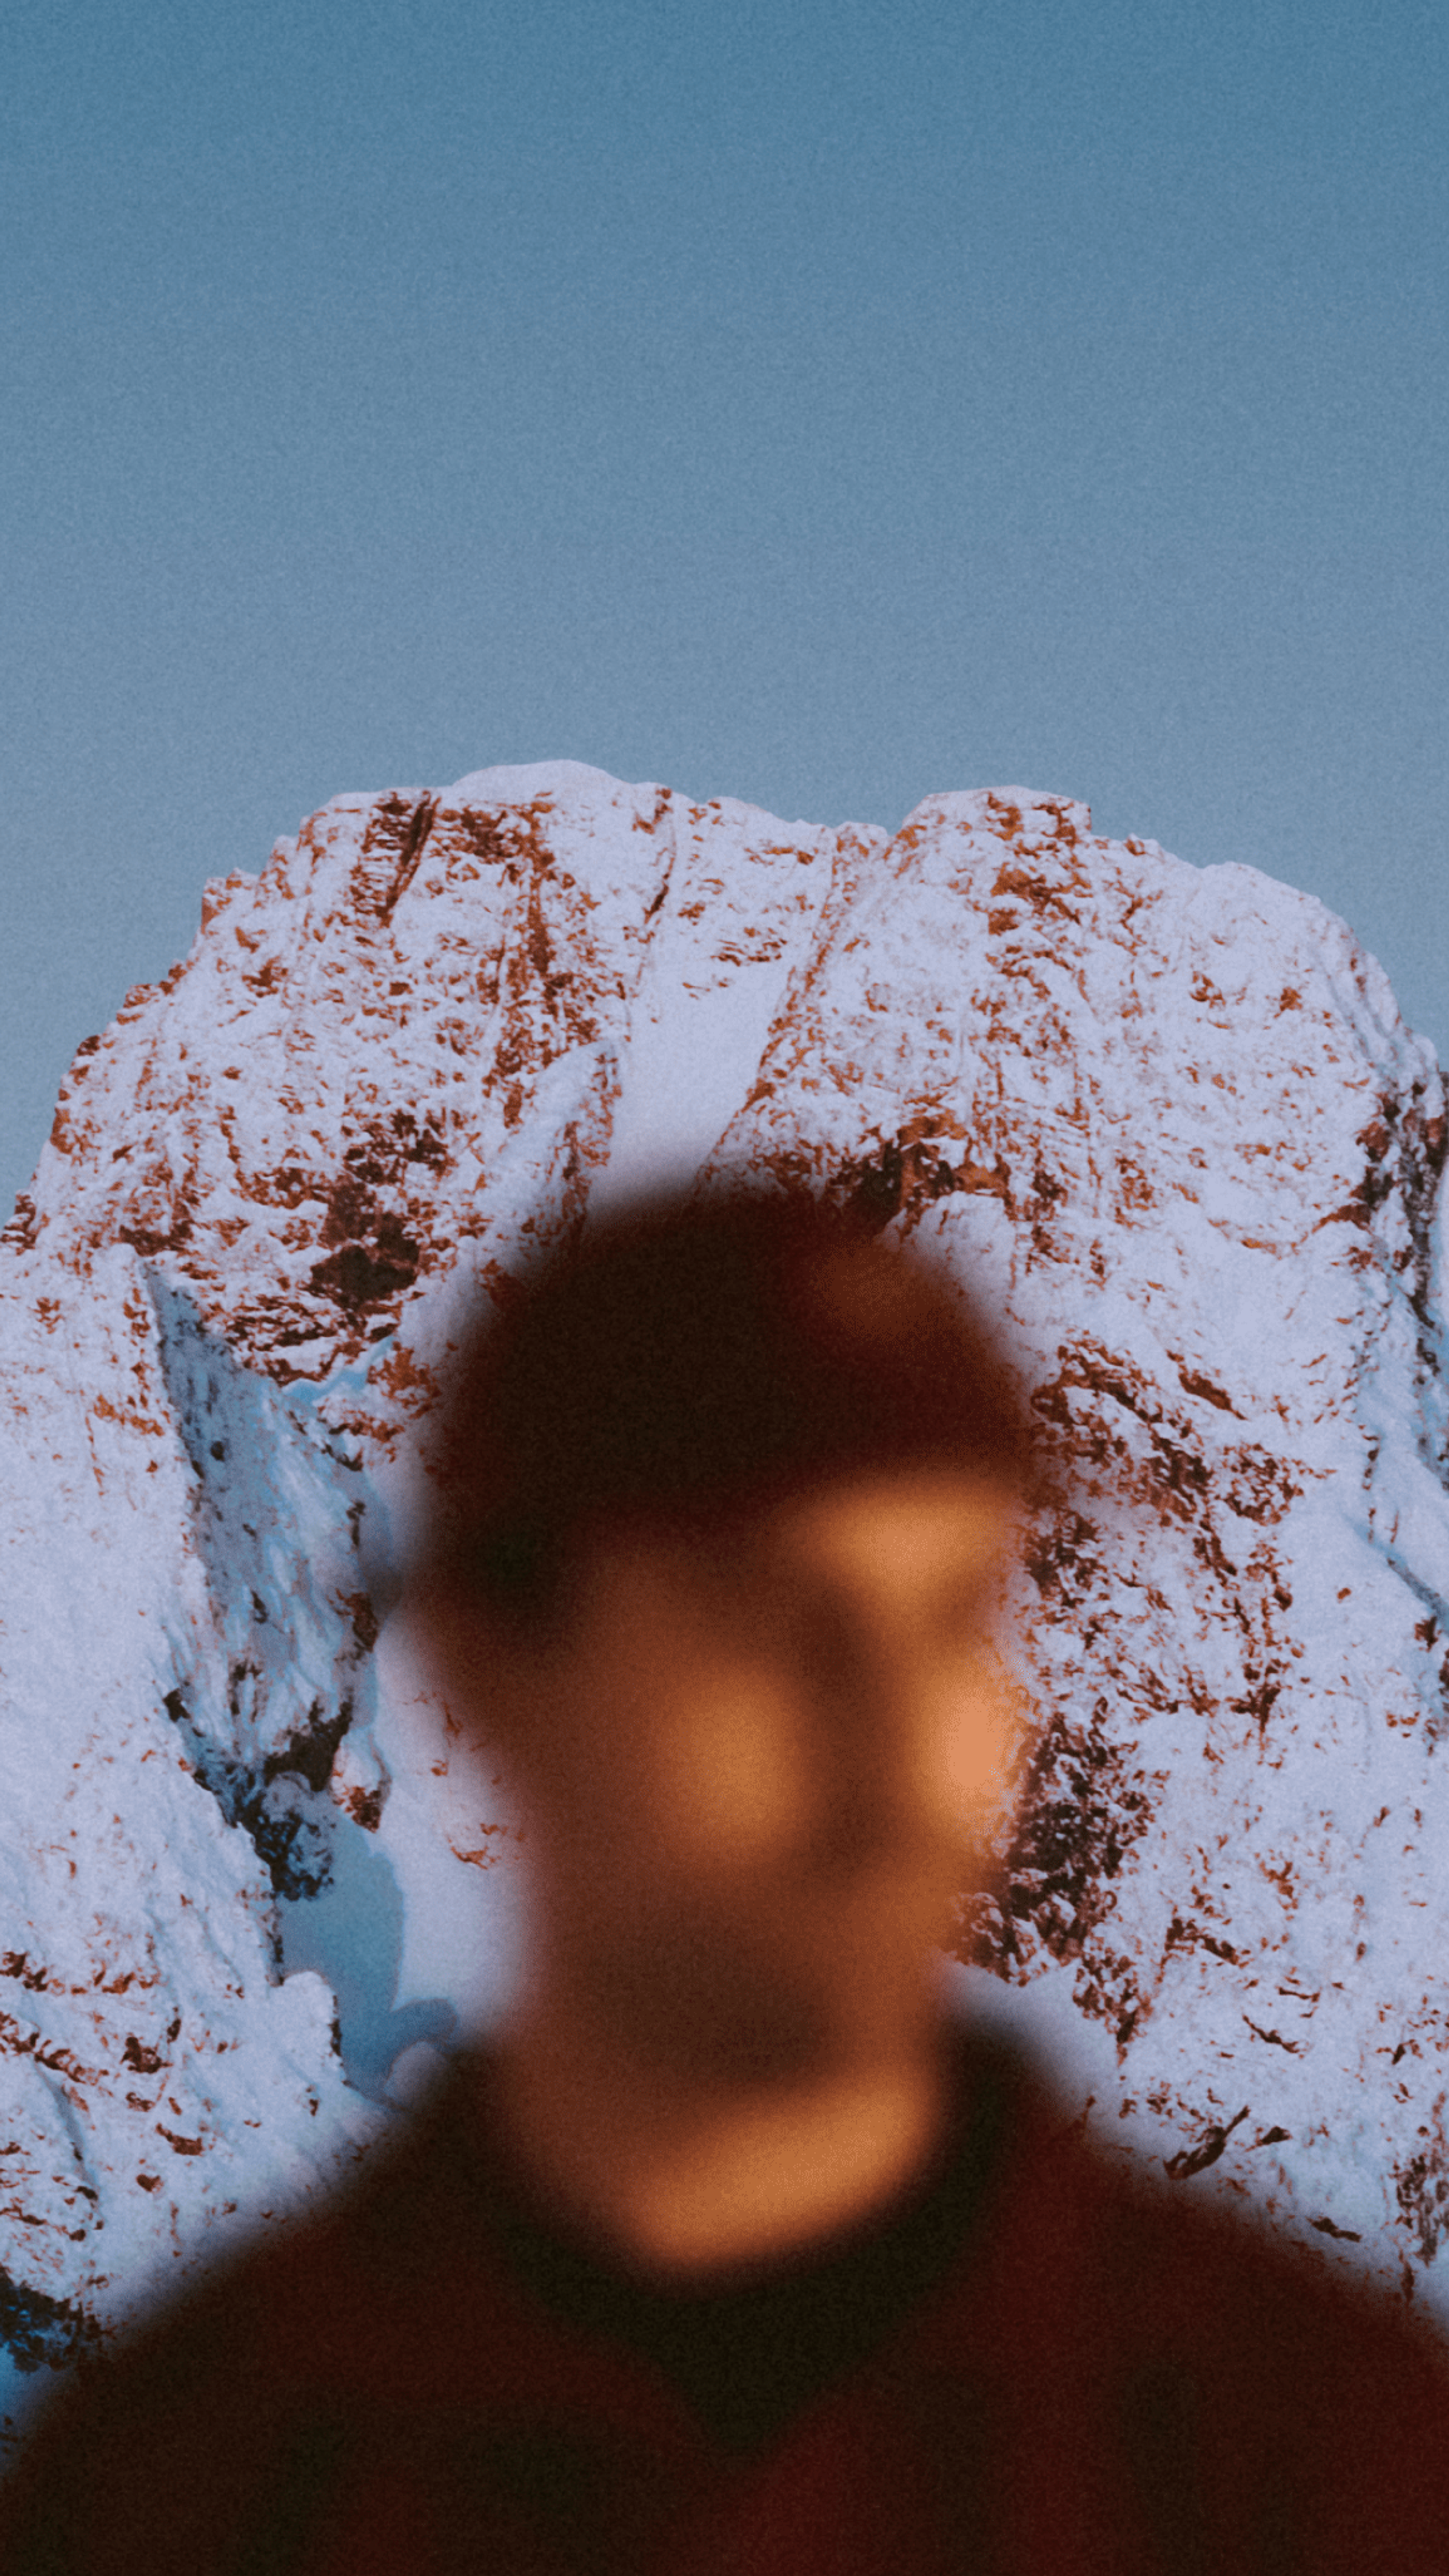 An image of a man in front of a mountain